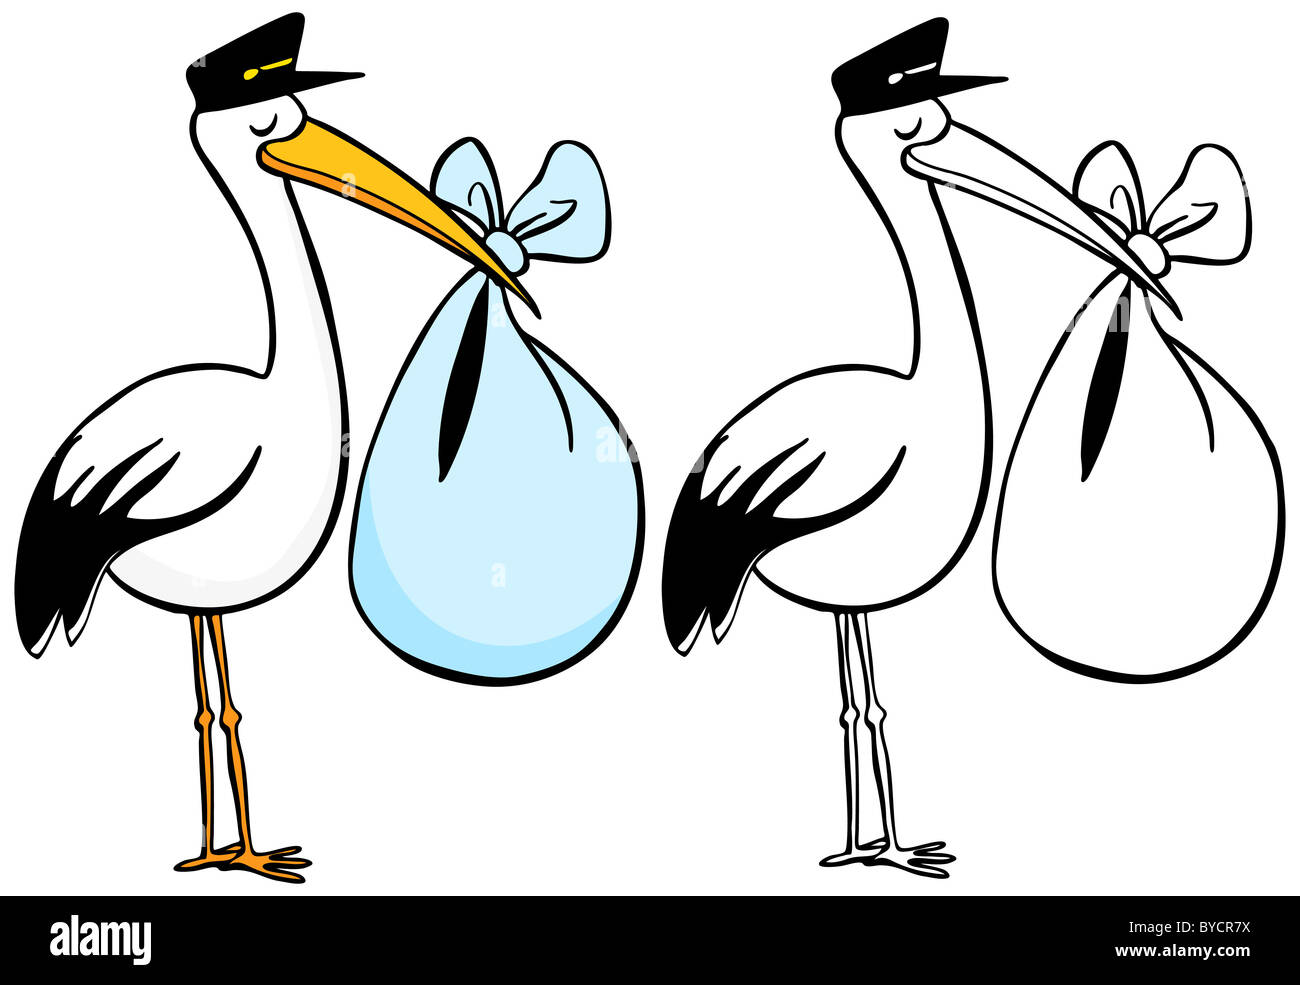 Cartoon image of a stork delivering a baby - both color and black / white versions. Stock Photo